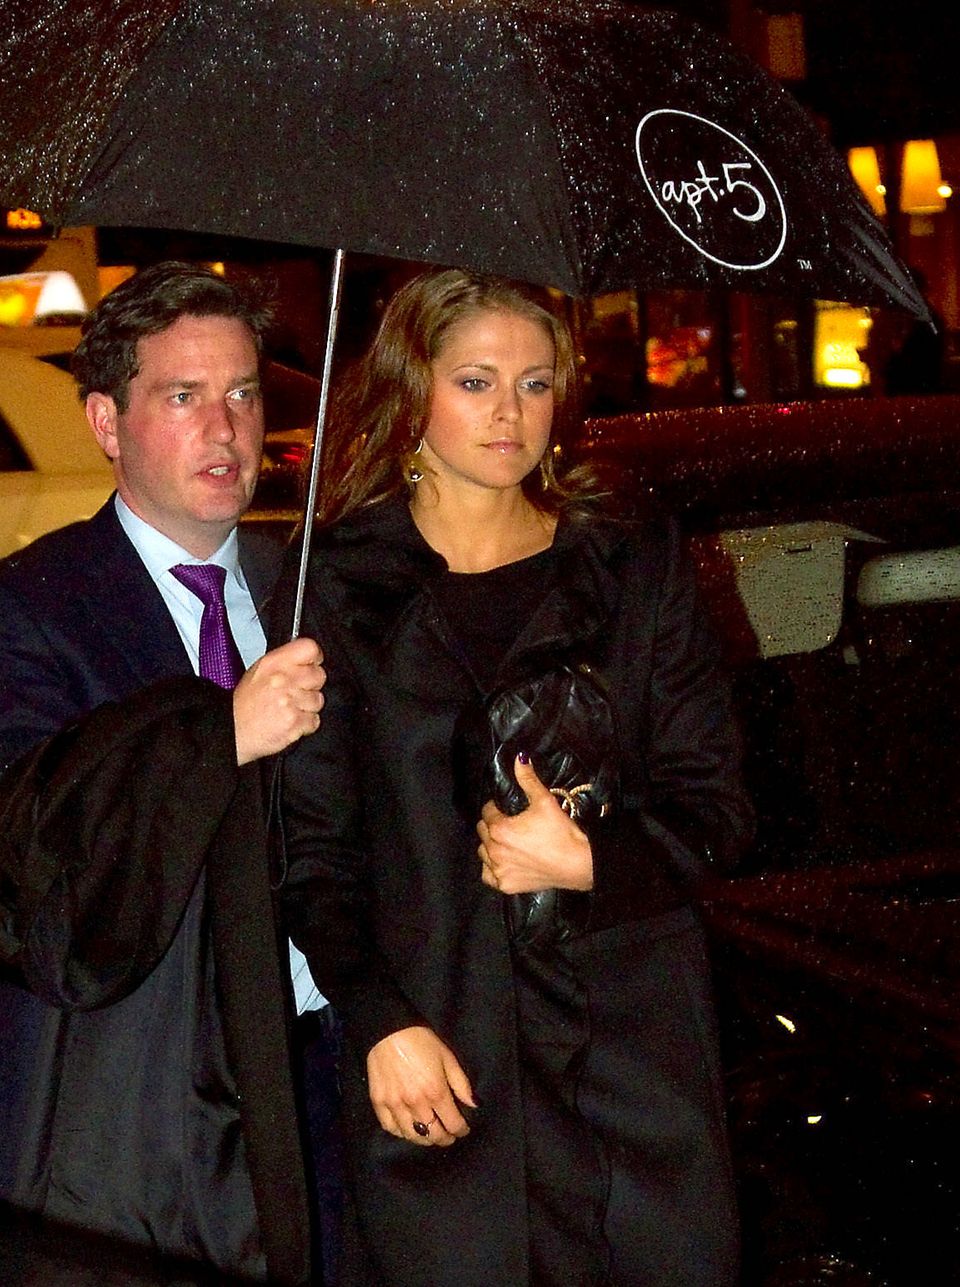 Chris O'Neill protects Princess Madeleine from the rainy New York weather.  They will then attend a concert by the Swedish Youth Orchestra on January 26, 2012 at Carnegie Hall.